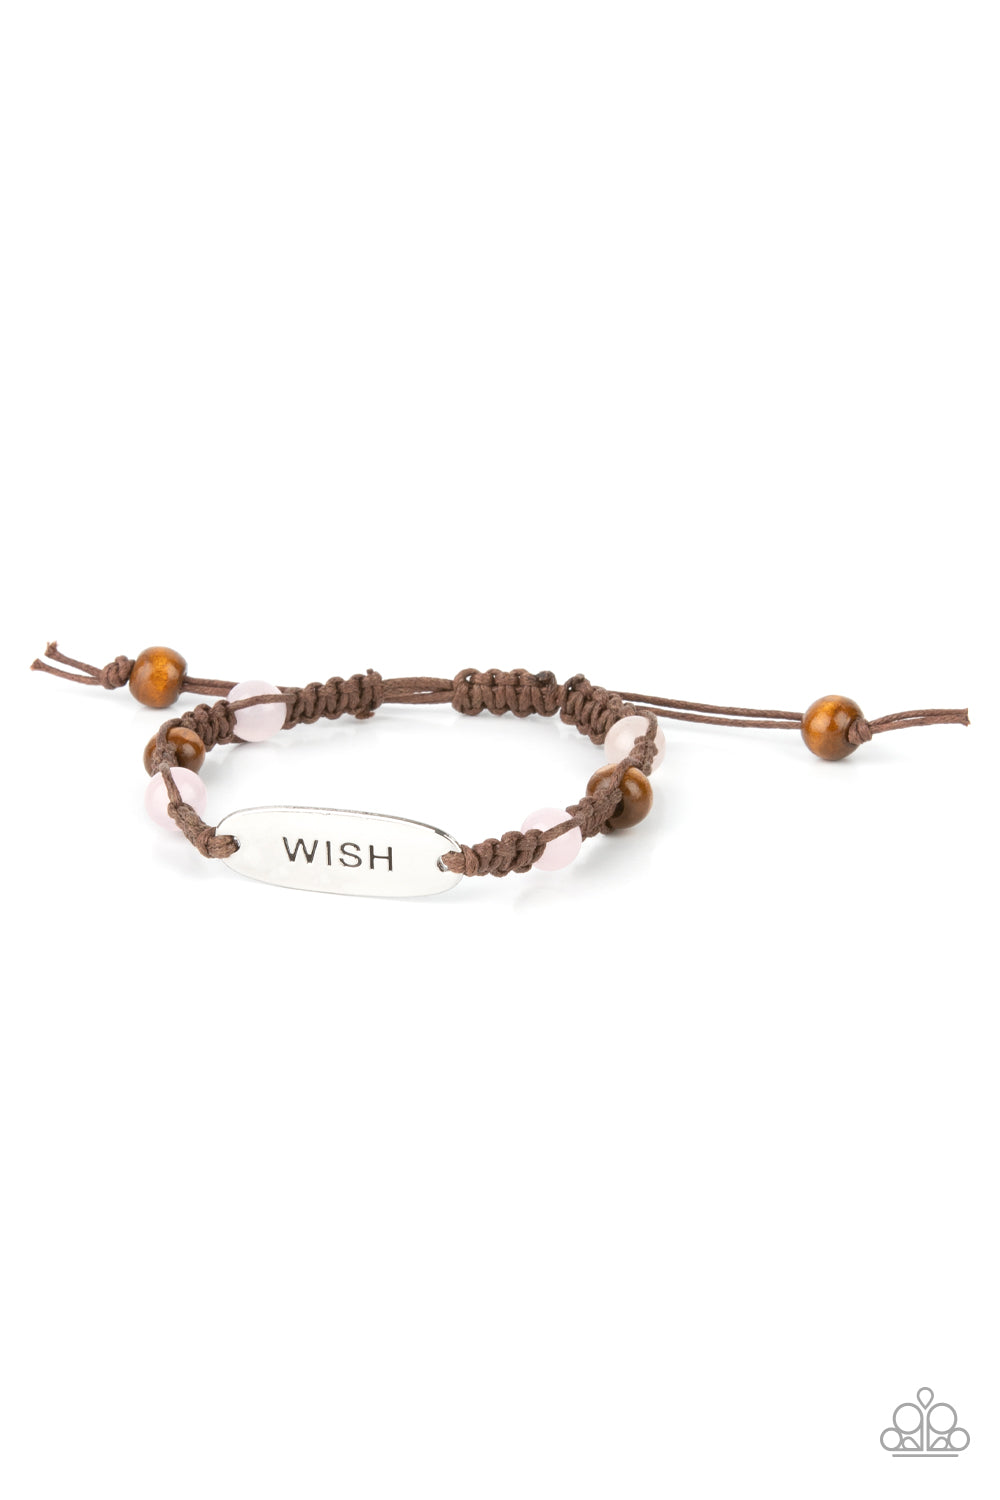 WISH This Way Pink Urban Bracelet - Paparazzi Accessories  An oval silver plate engraved with the word "WISH" creates a warmhearted medallion as it connects to brown cording interwoven with wooden and glossy pink beads for a harmonious vibe around the wrist. Features an adjustable sliding knot closure.  All Paparazzi Accessories are lead free and nickel free!  Sold as one individual bracelet.